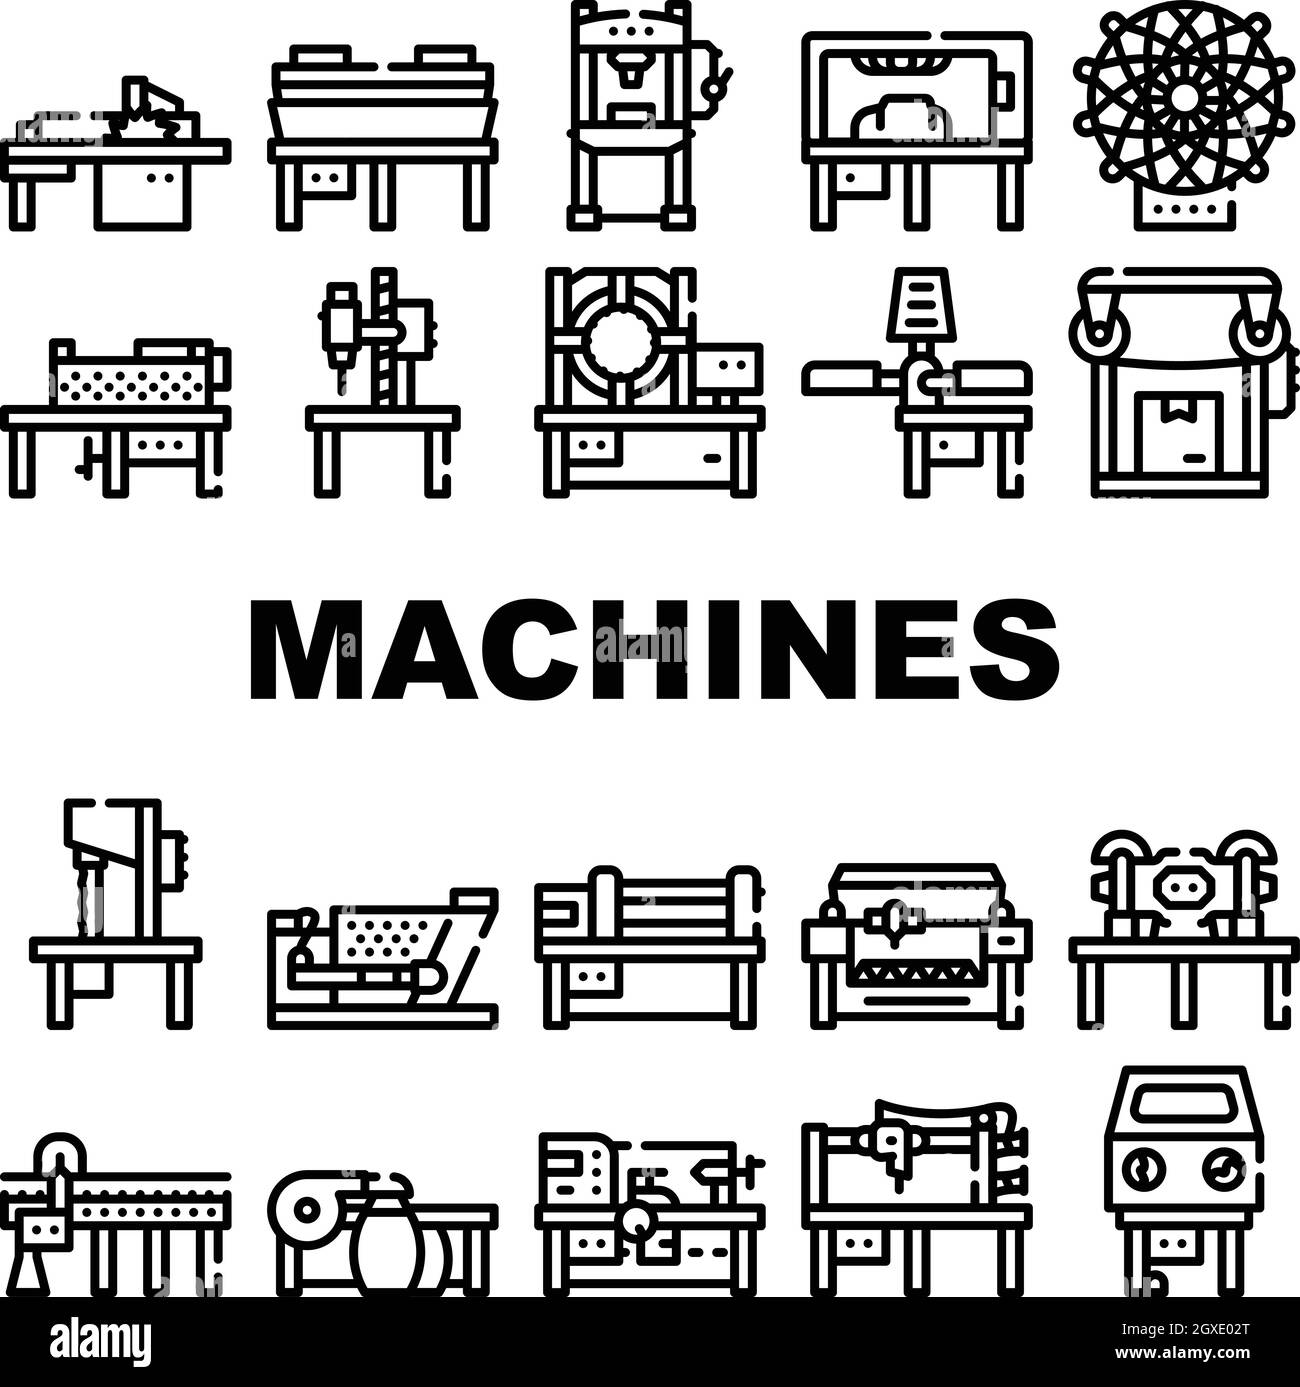 Industrial Machines Collection Icons Set Vektor Flach Stock Vektor